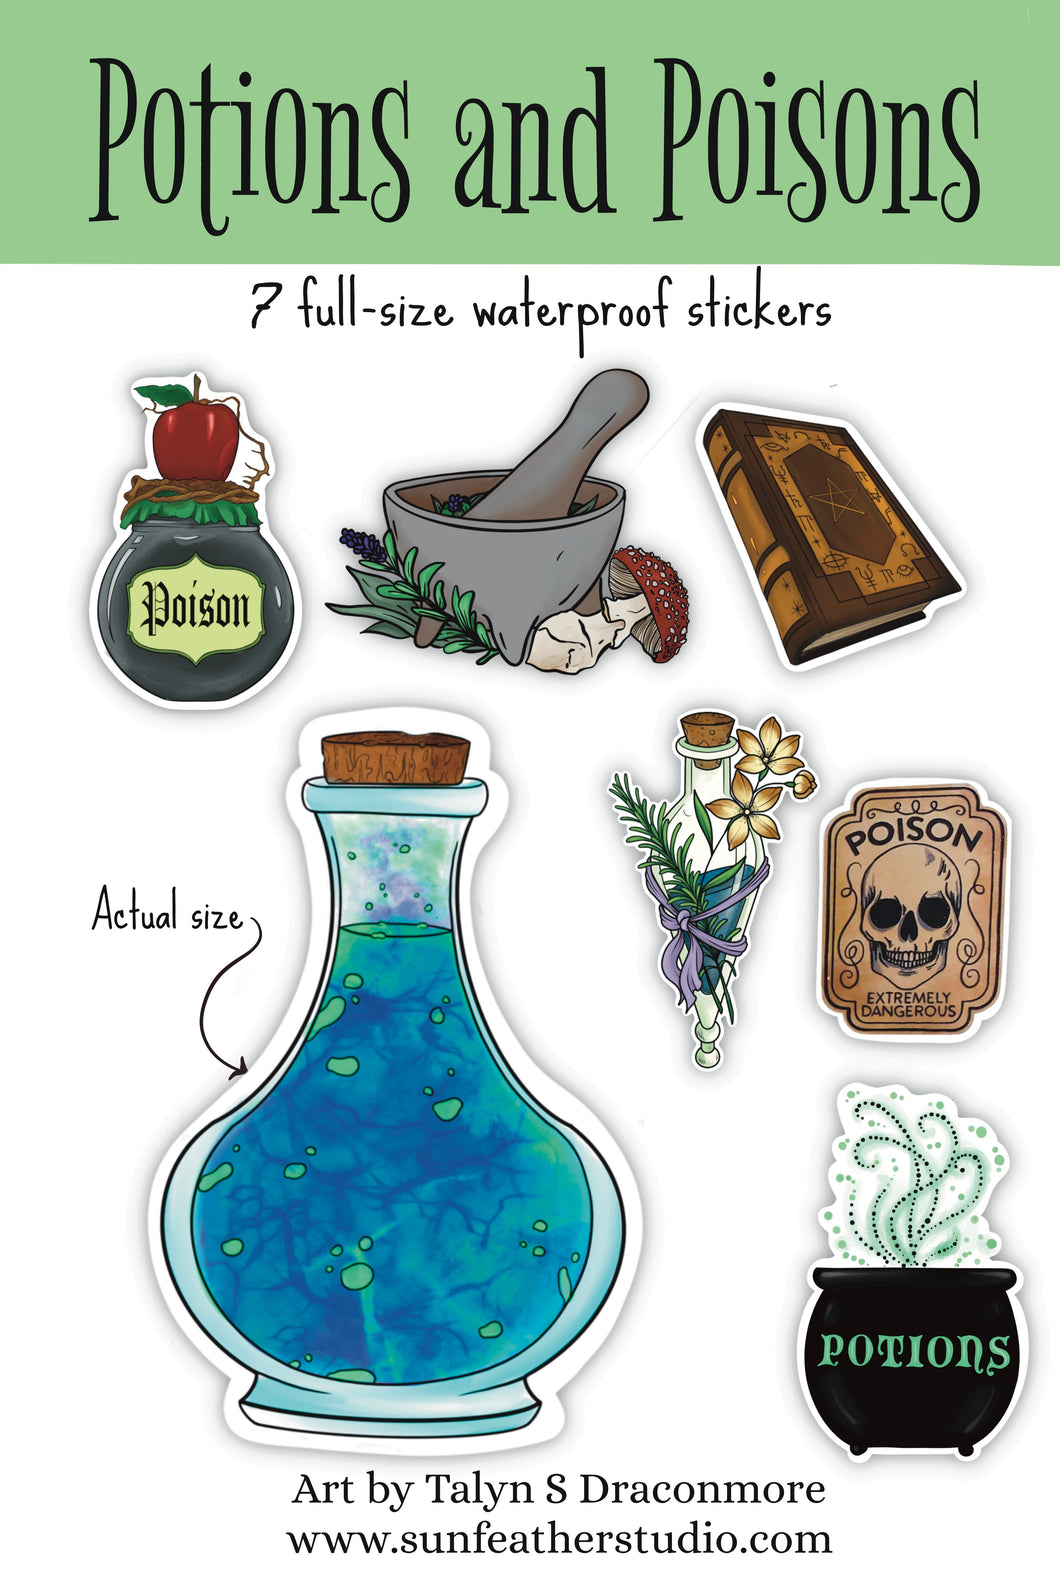 Potions and Poisons - Sticker Set